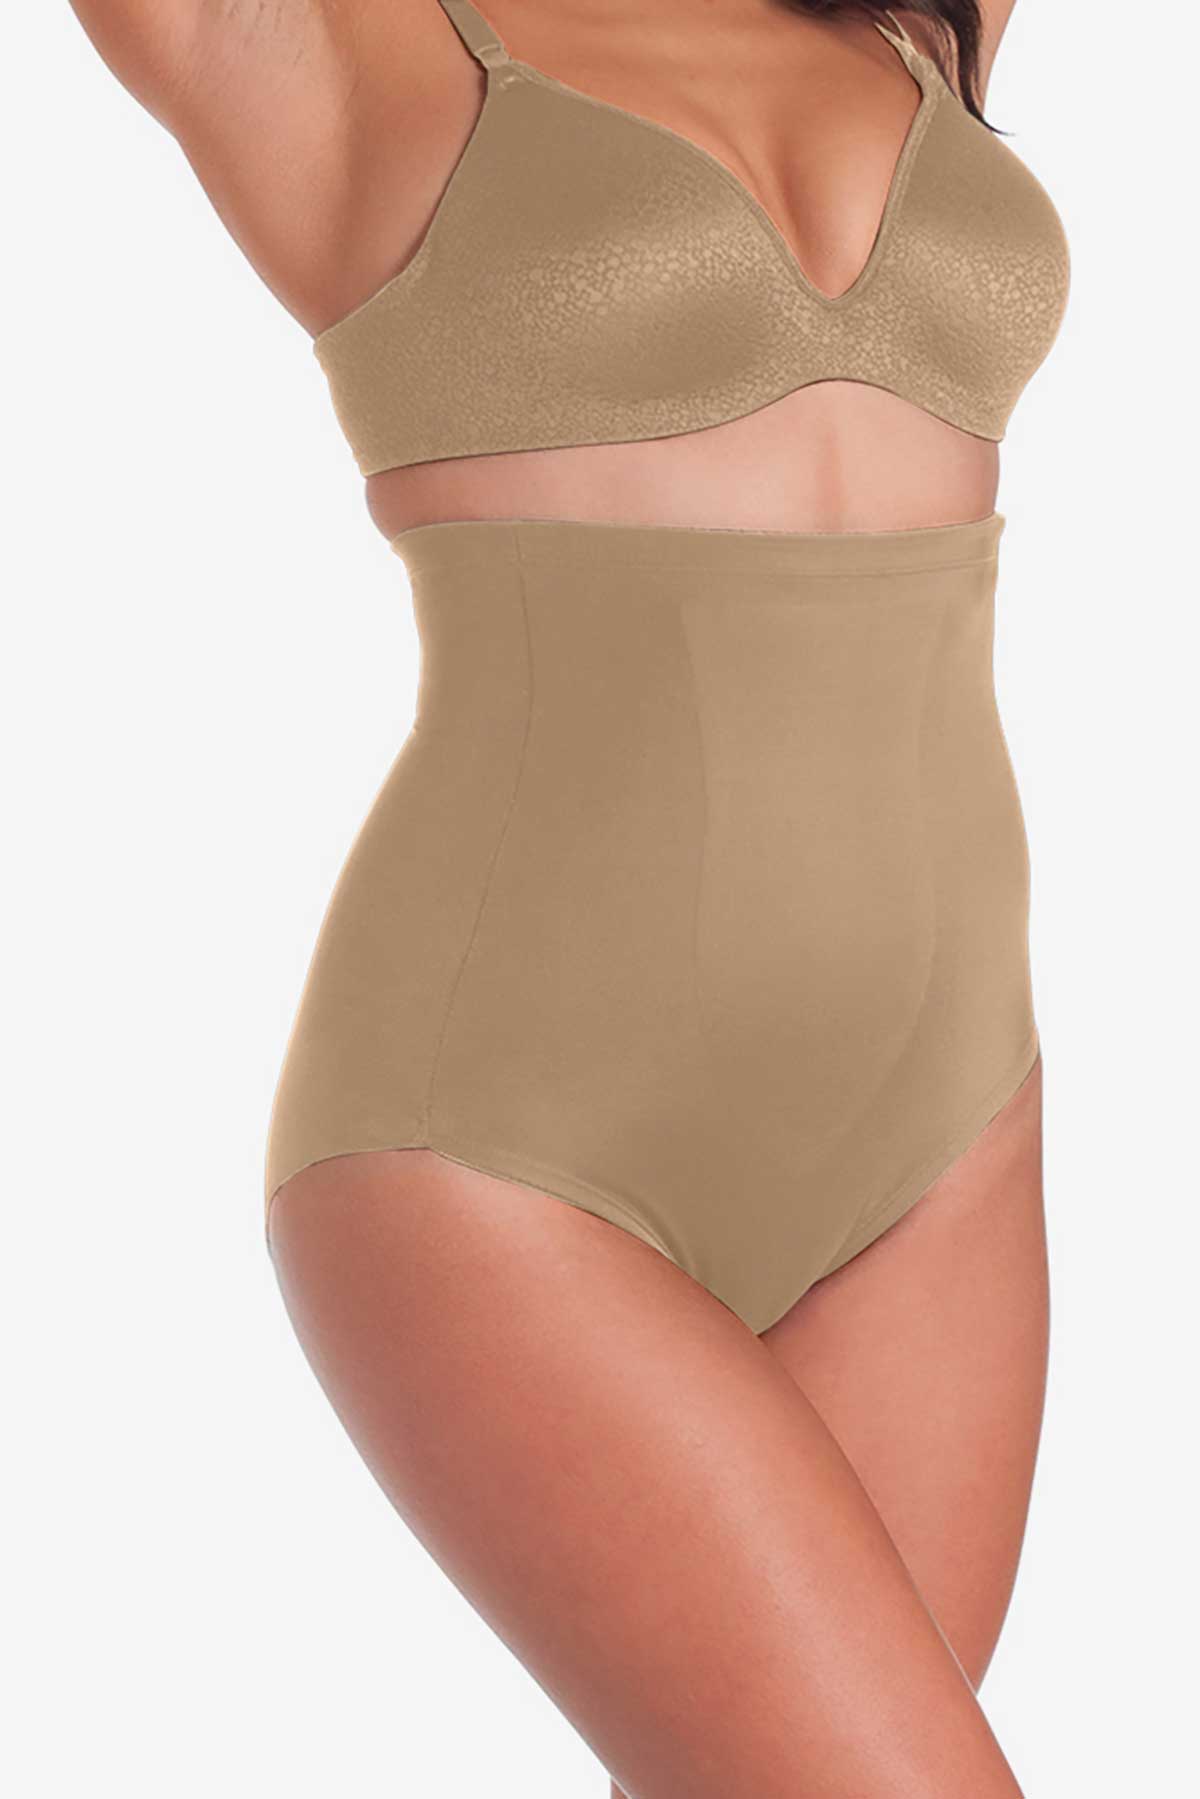 Plus Size Womens Body Shaper With Tummy Control, High Waist, And